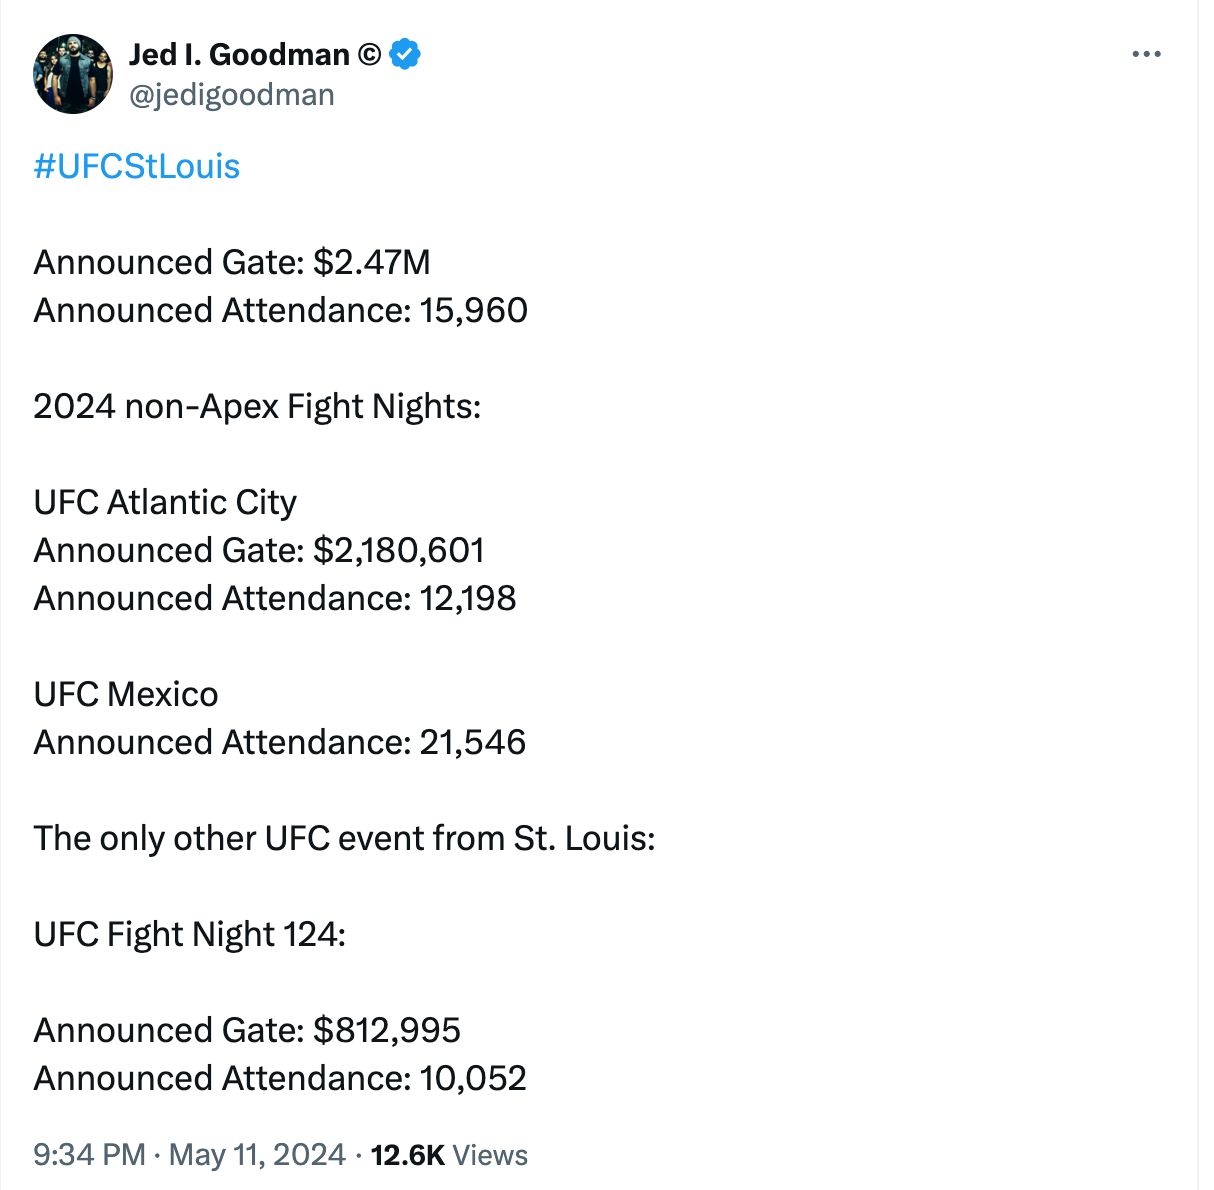 Jed I. Goodman © @jedigoodman #UFCStLouis   Announced Gate: $2.47M Announced Attendance: 15,960  2024 non-Apex Fight Nights:  UFC Atlantic City Announced Gate: $2,180,601 Announced Attendance: 12,198  UFC Mexico    Announced Attendance: 21,546  The only other UFC event from St. Louis:  UFC Fight Night 124:   Announced Gate: $812,995 Announced Attendance: 10,052